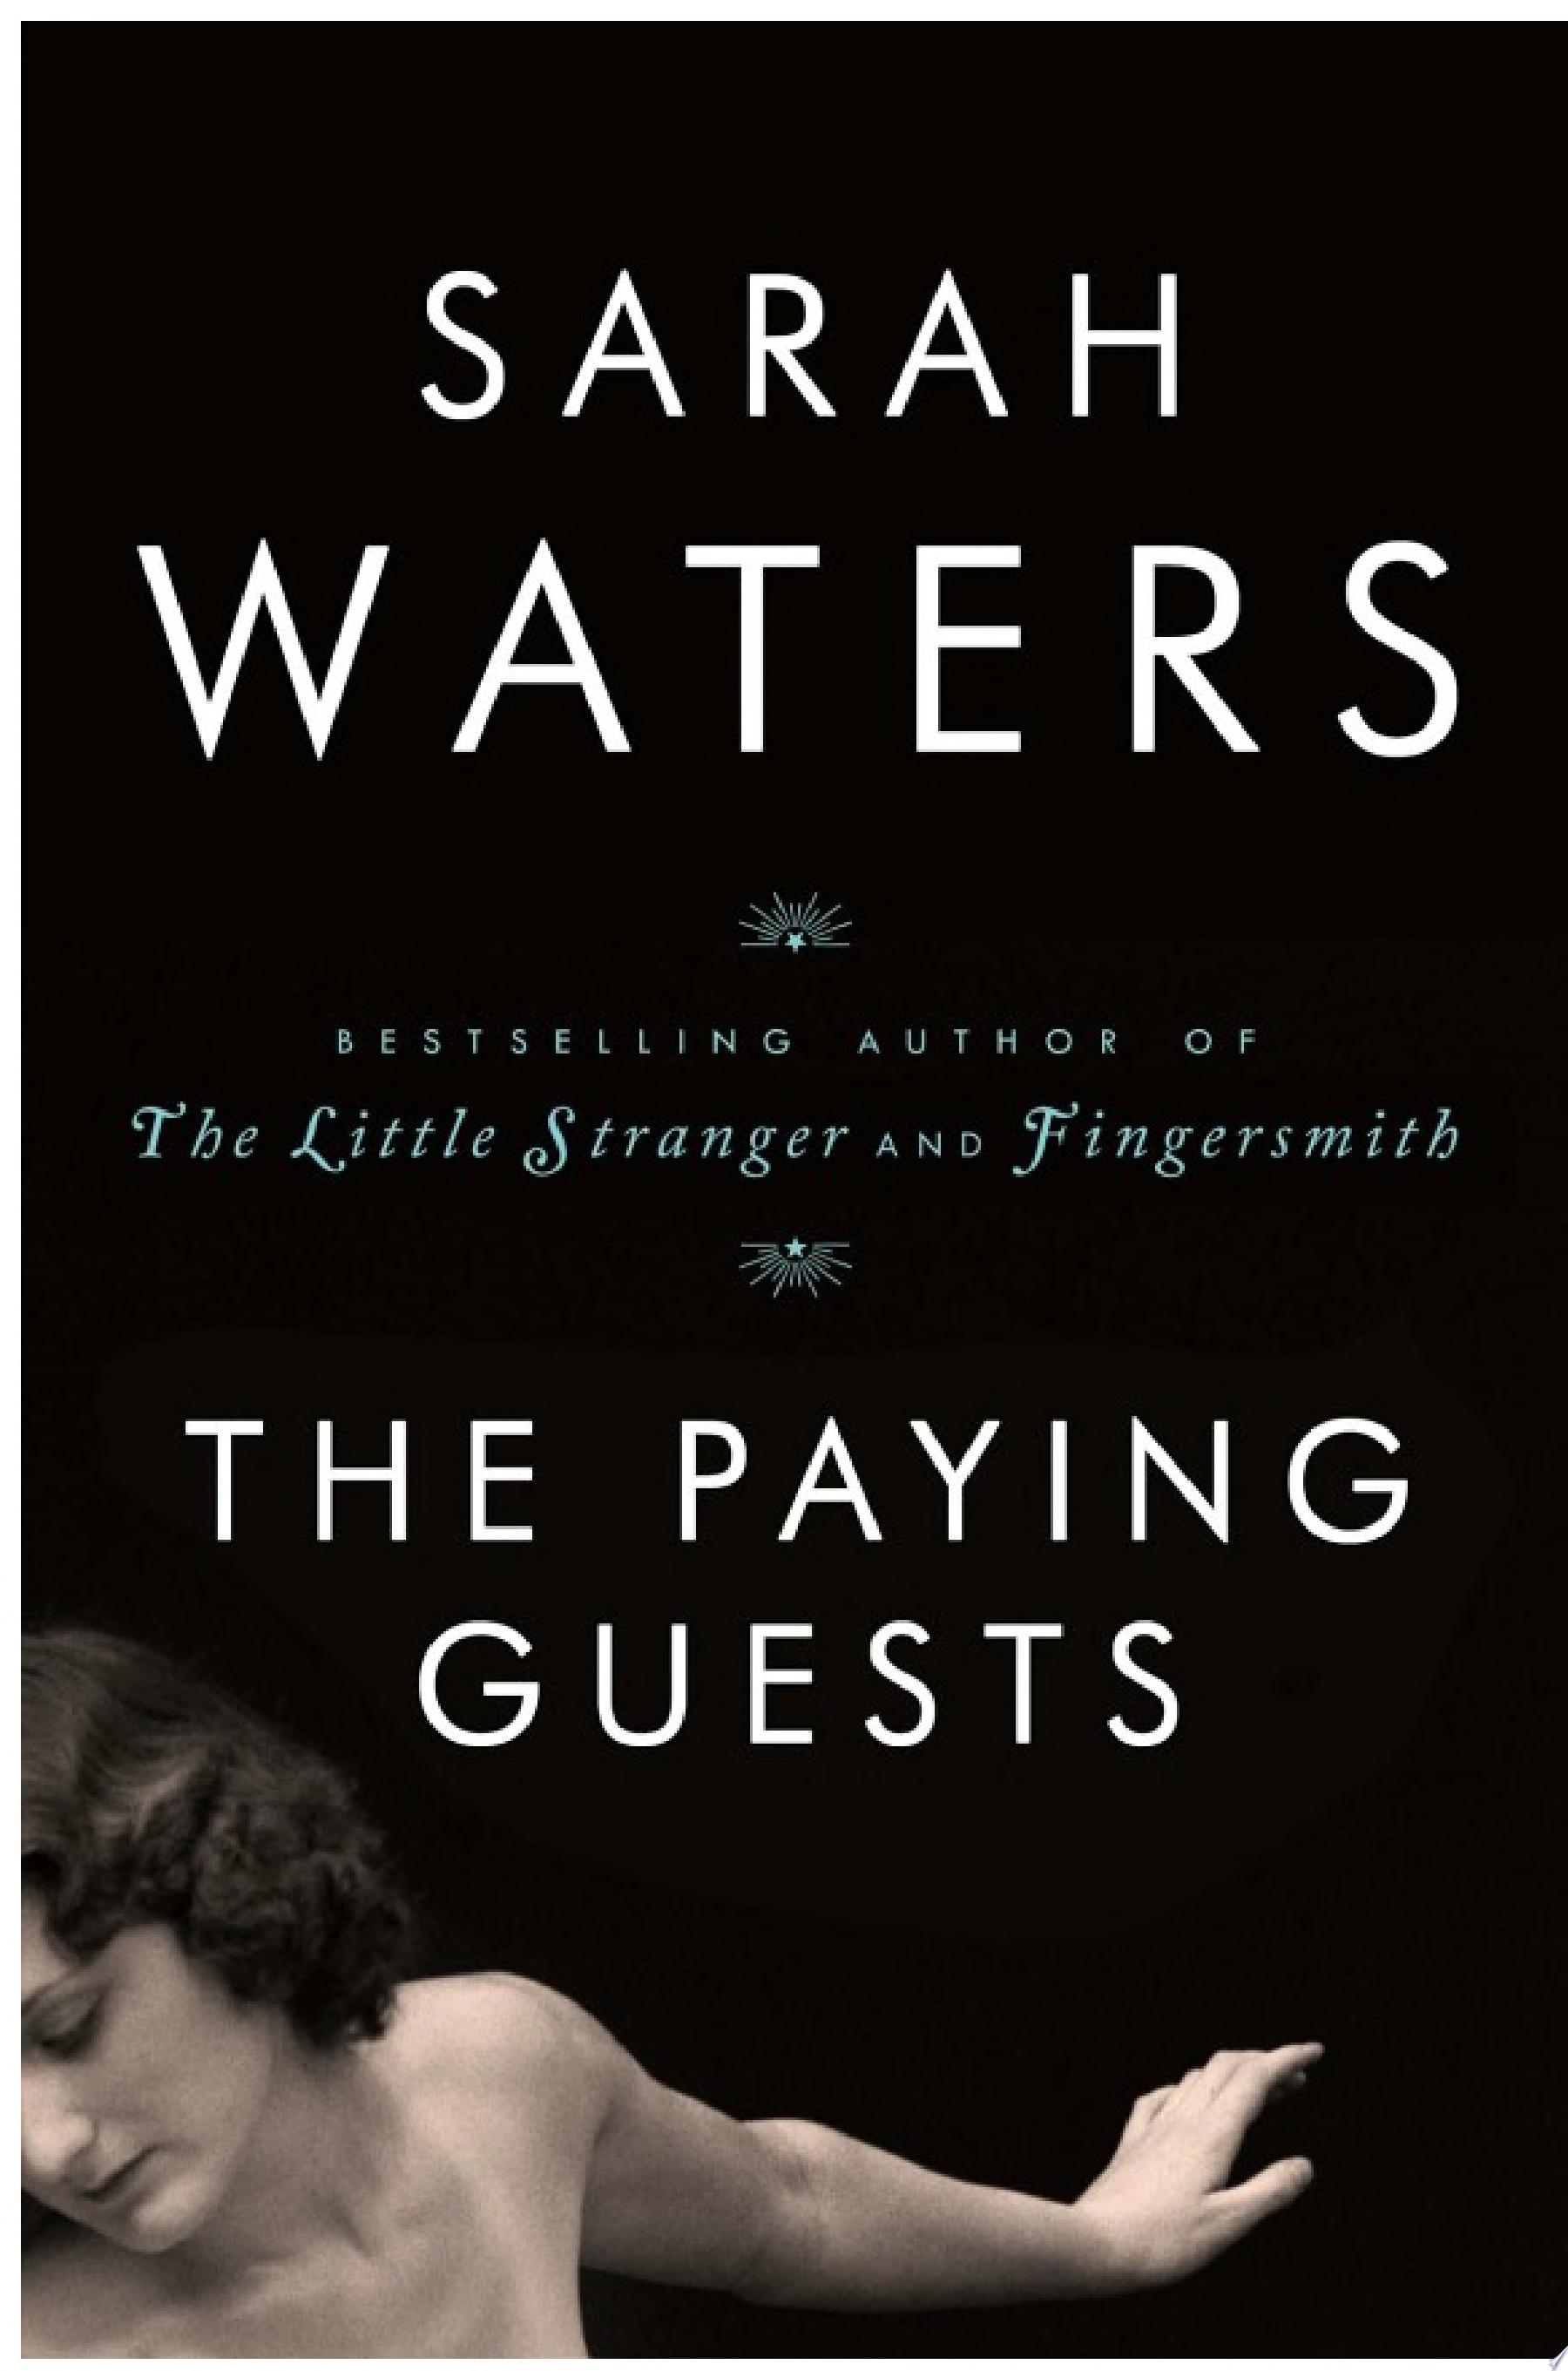 Image for "The Paying Guests"